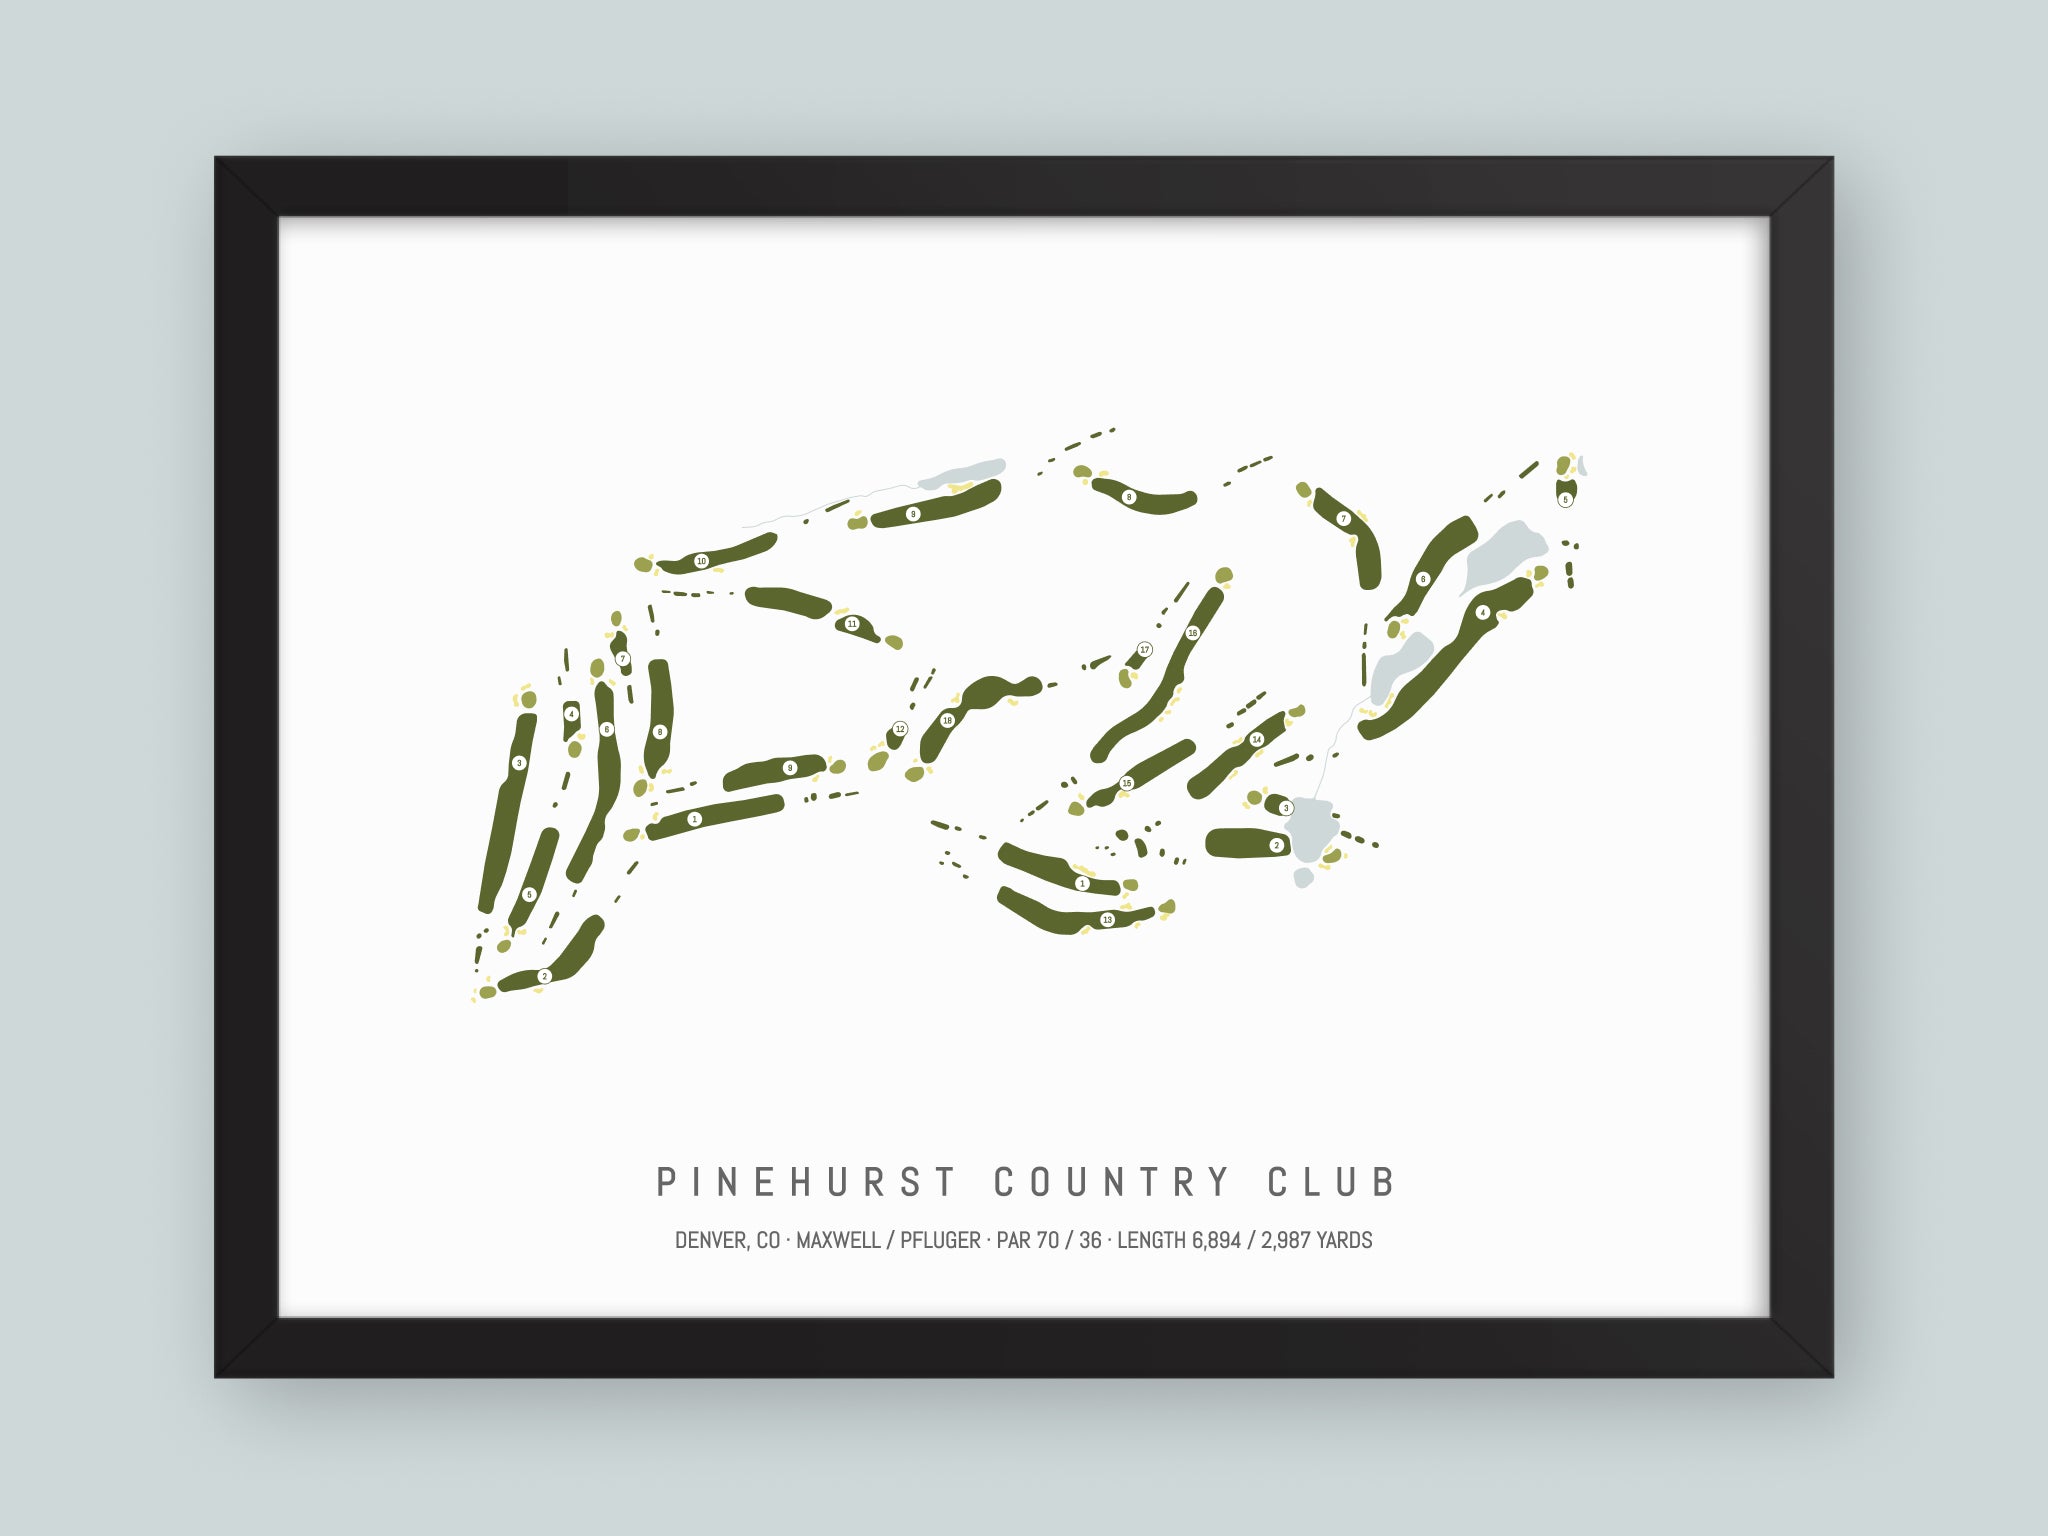 Pinehurst-Country-Club-CO--Black-Frame-24x18-With-Hole-Numbers